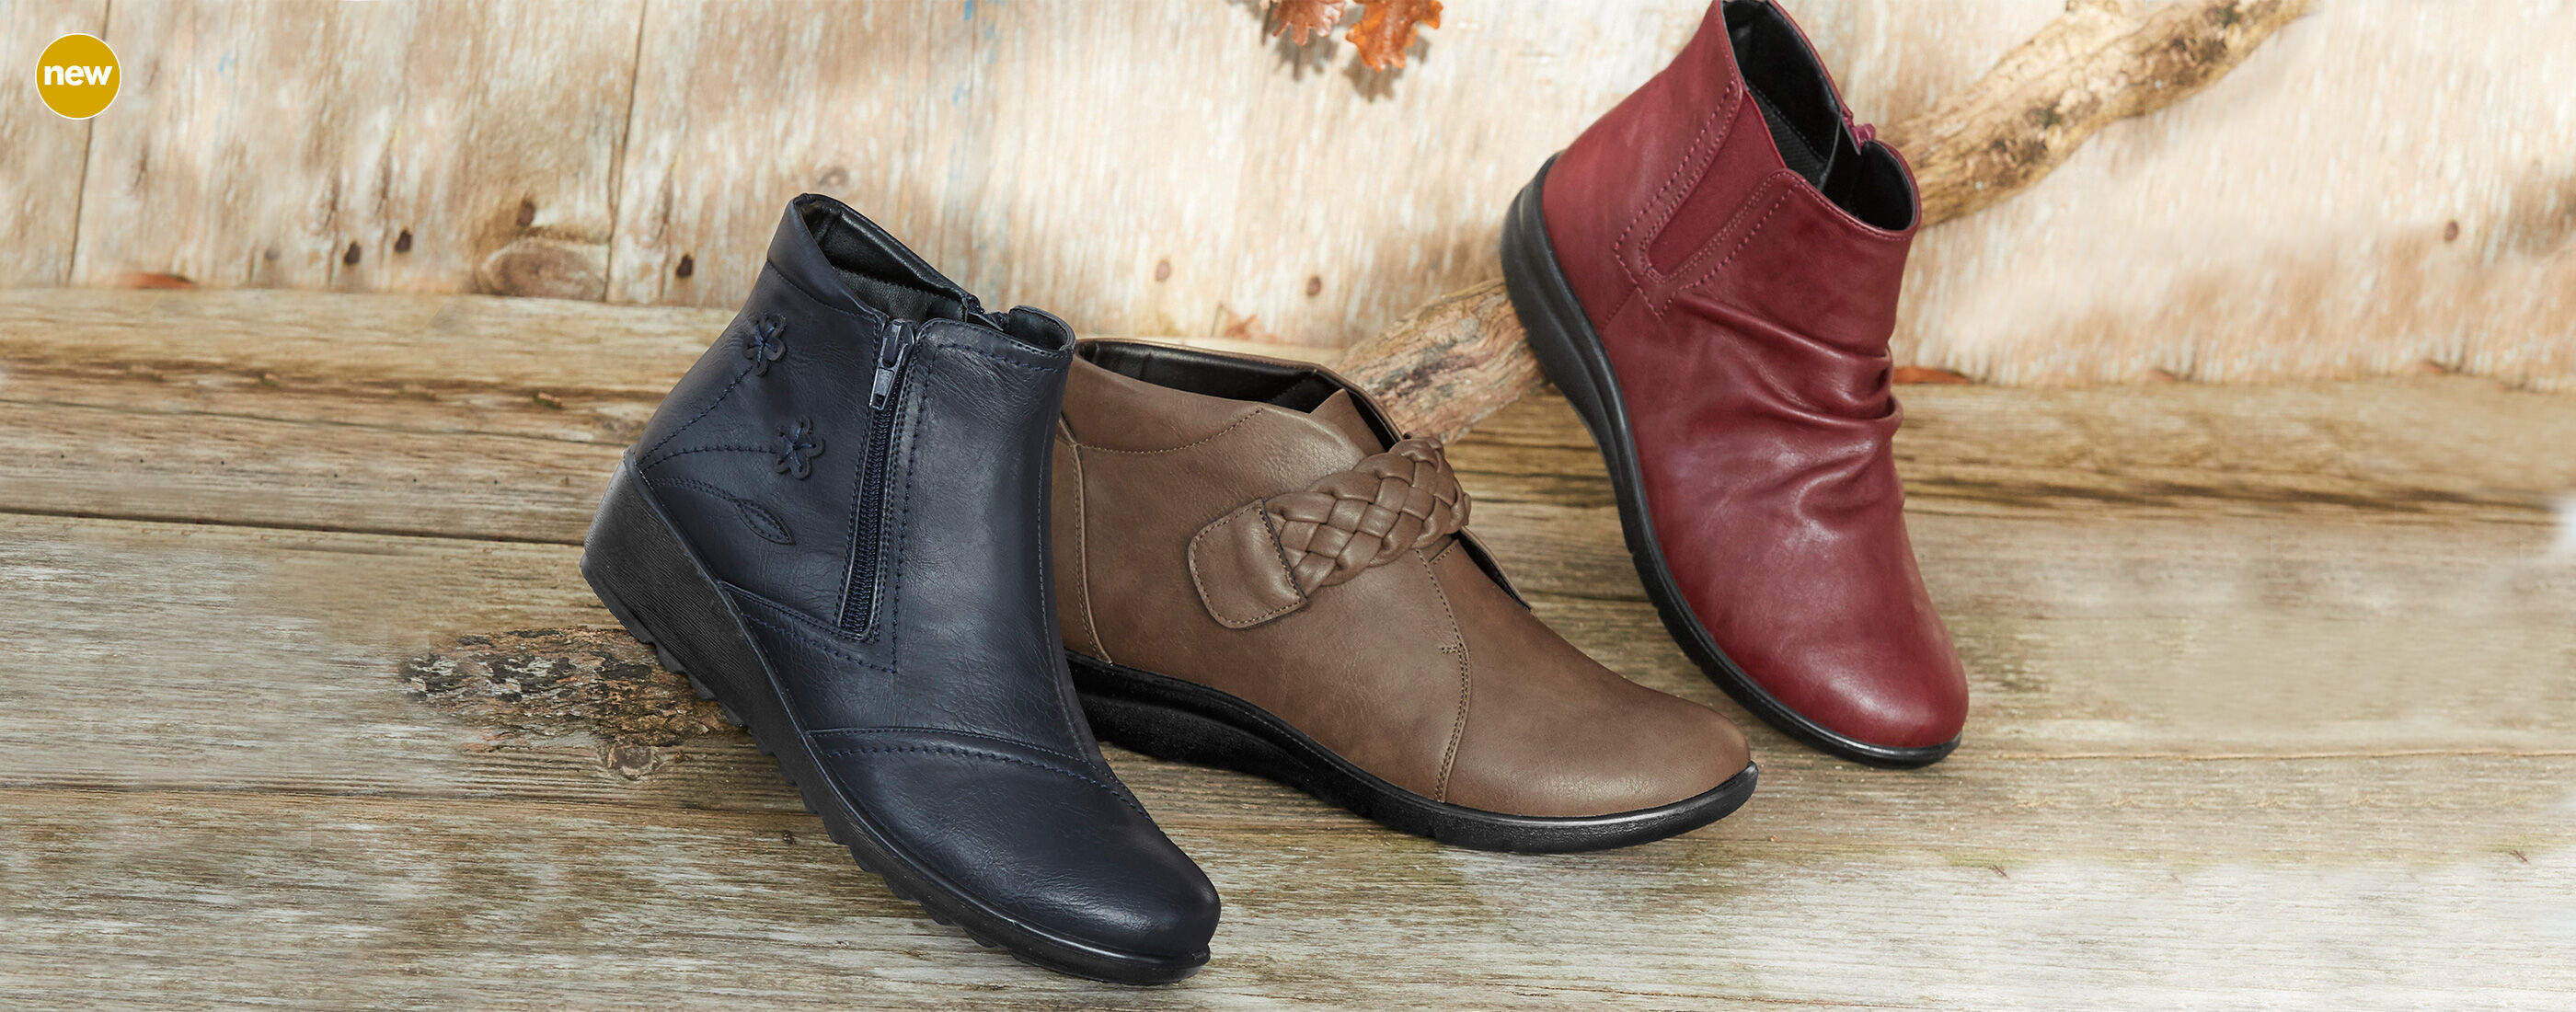 Autumn Footwear at Cotton Traders